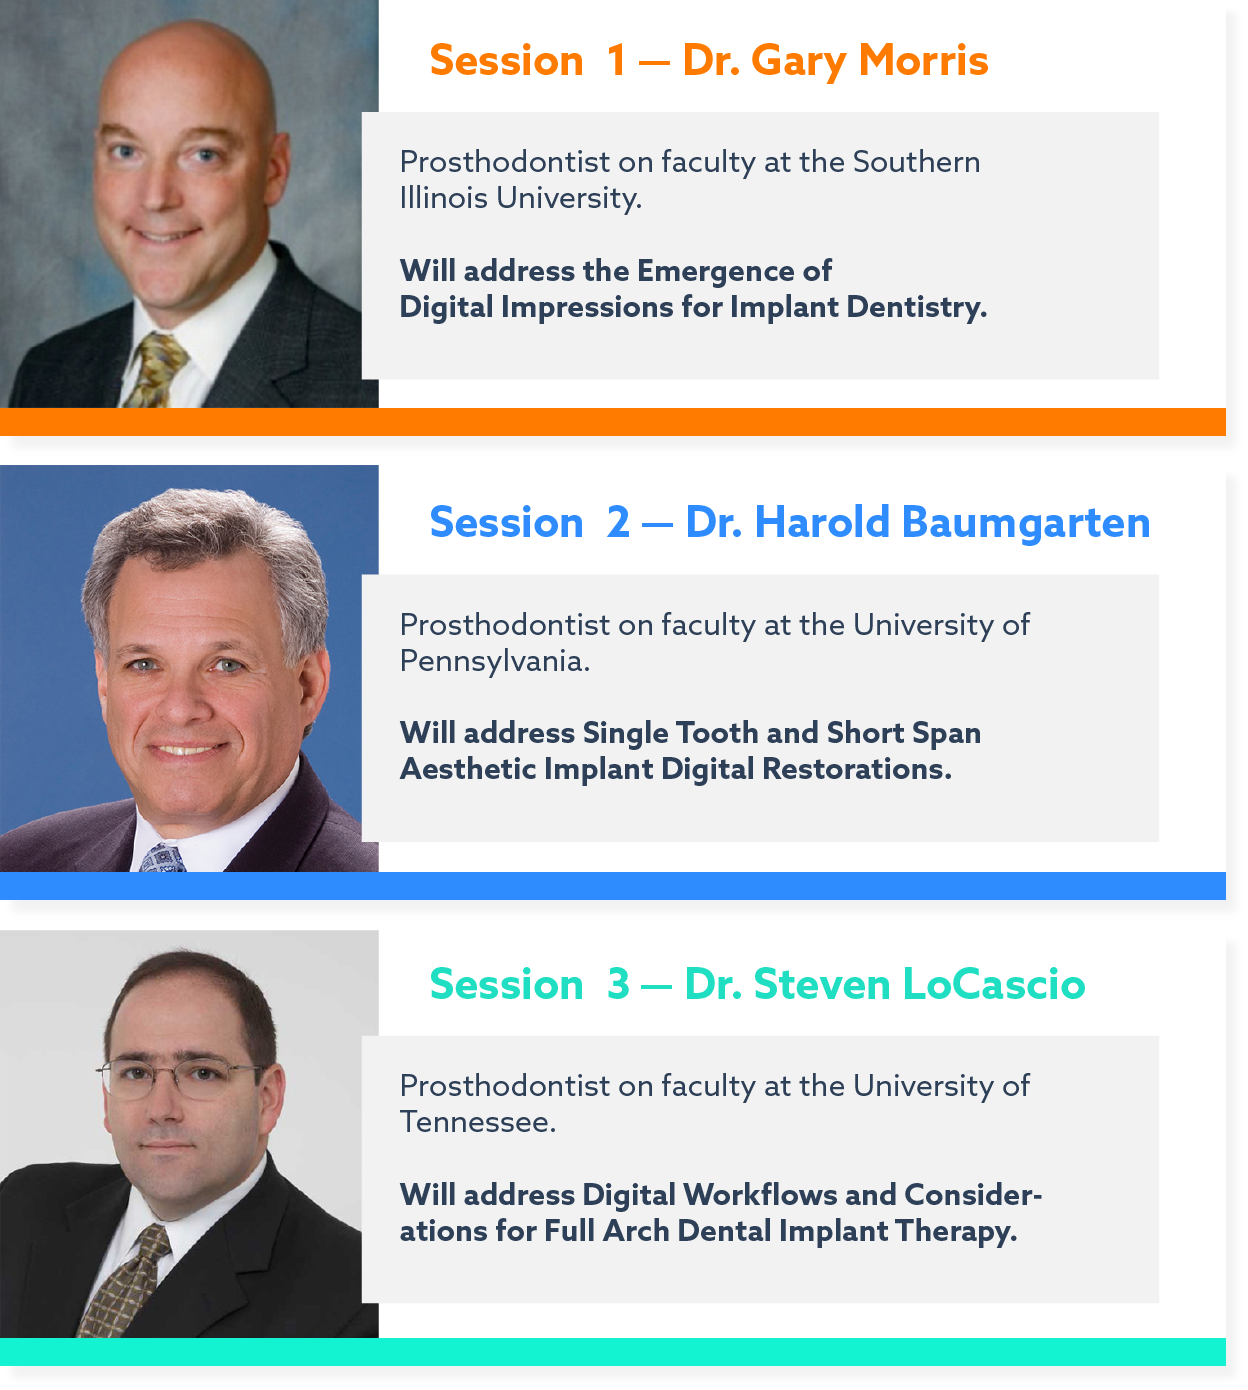 DDS Lab - Digital Dental Impression - the time is now - Speakers @1x